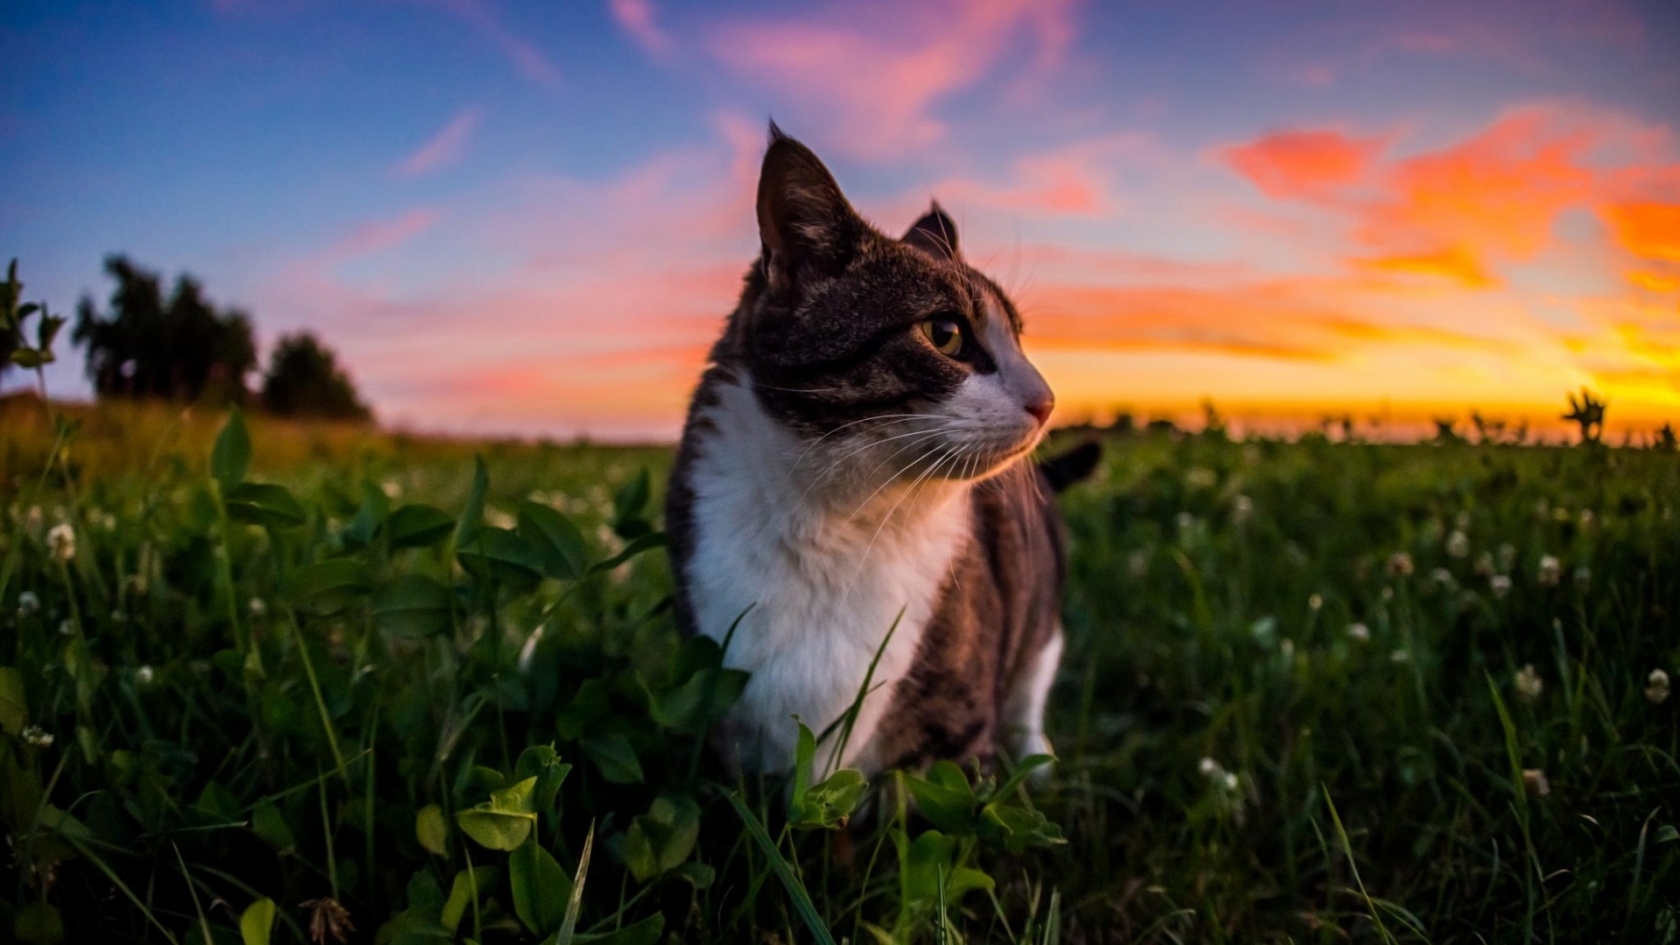 Gorgeous Little Cat and Sunset for 1680 x 945 HDTV resolution